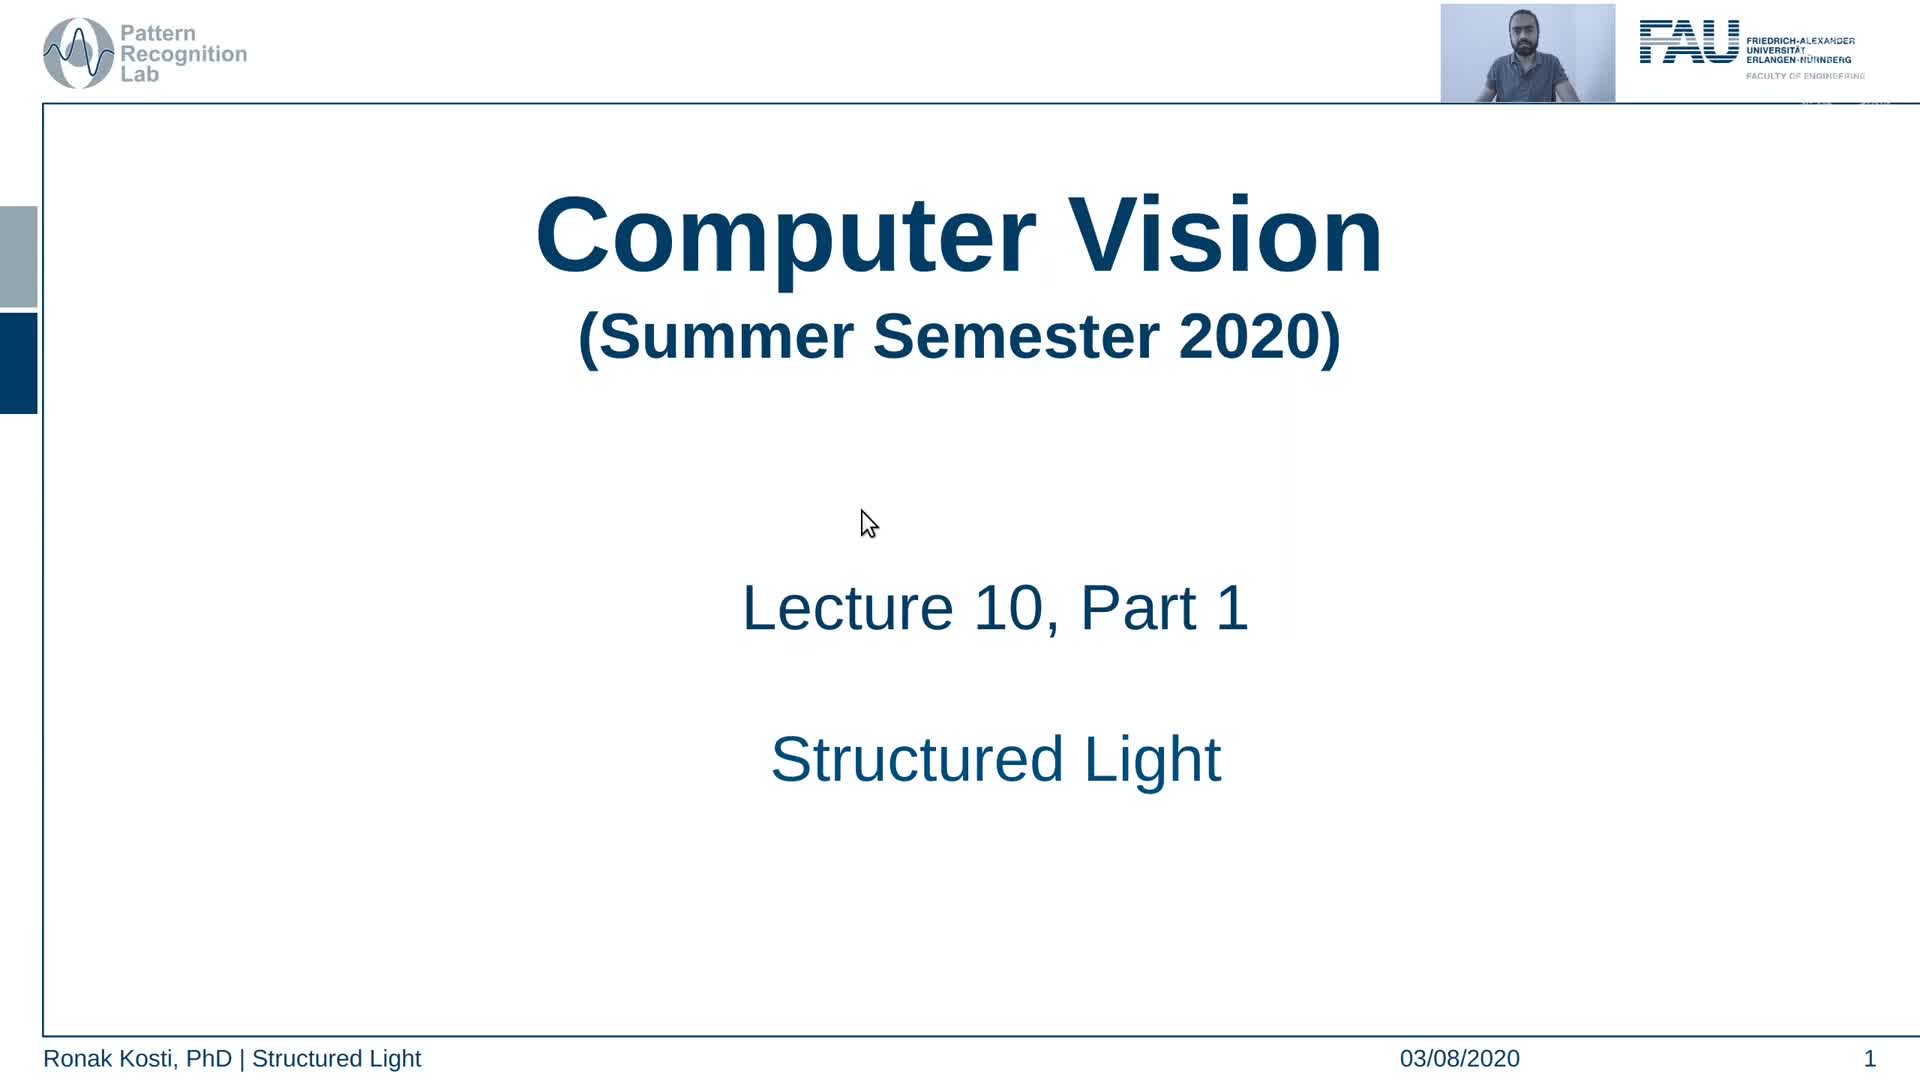 (Lecture 10, Part 1) Structured Light preview image